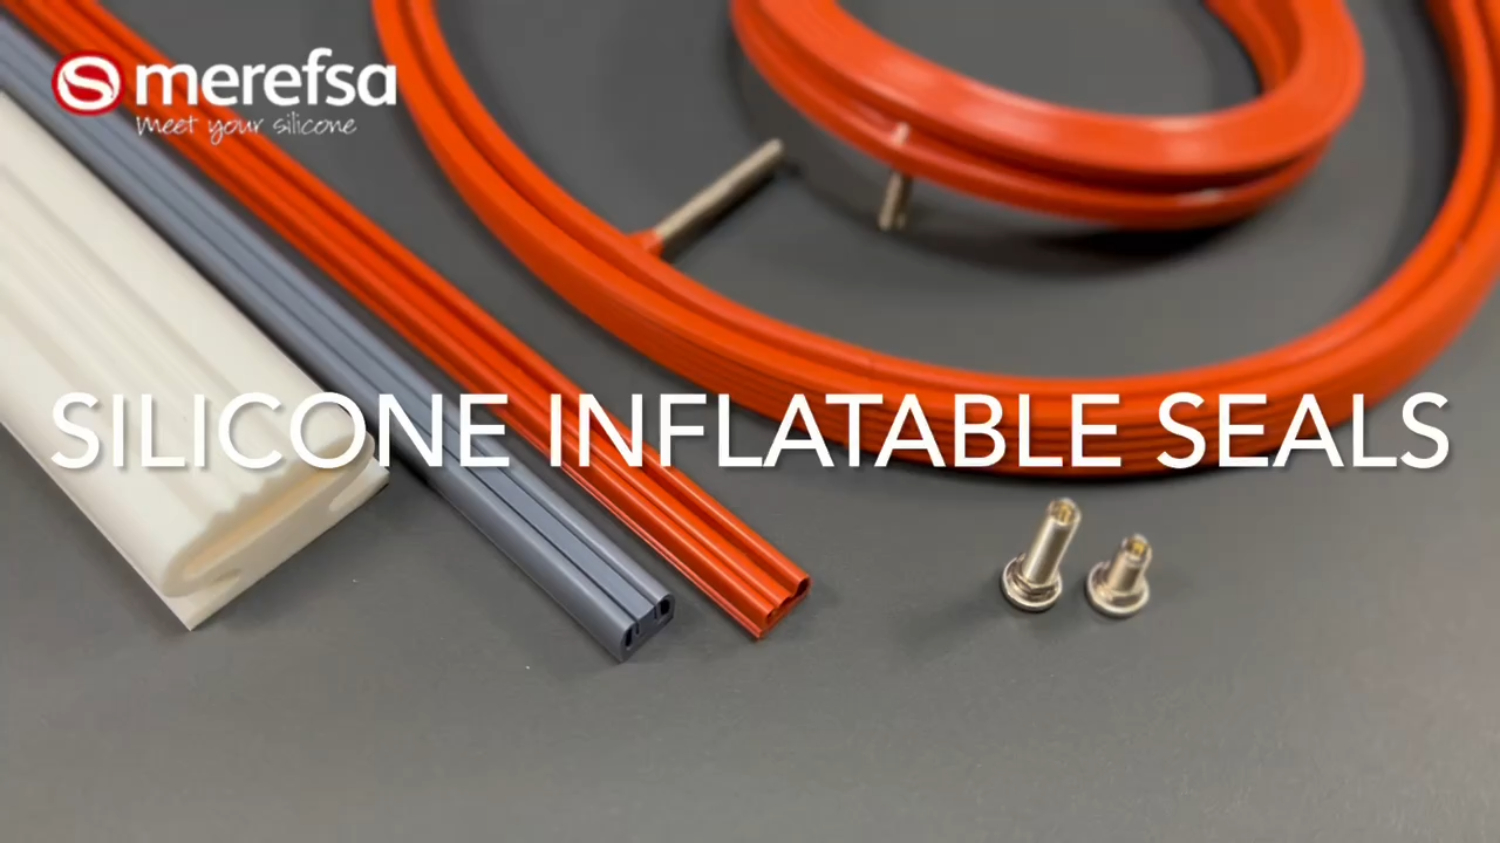 Silicone inflatable seals